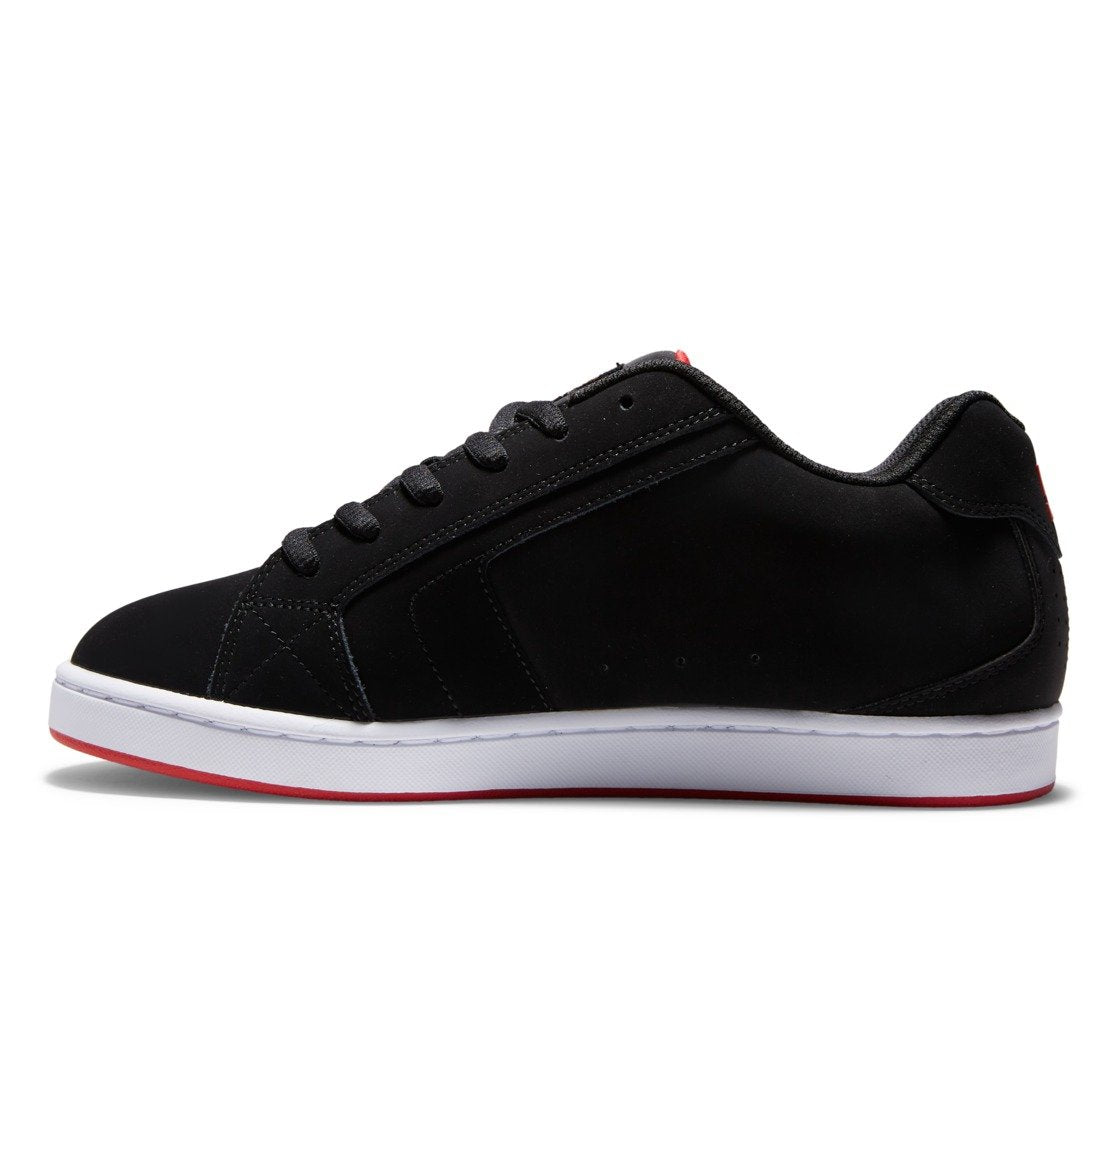 DC SHOES NET BLACK & RED TRAINERS